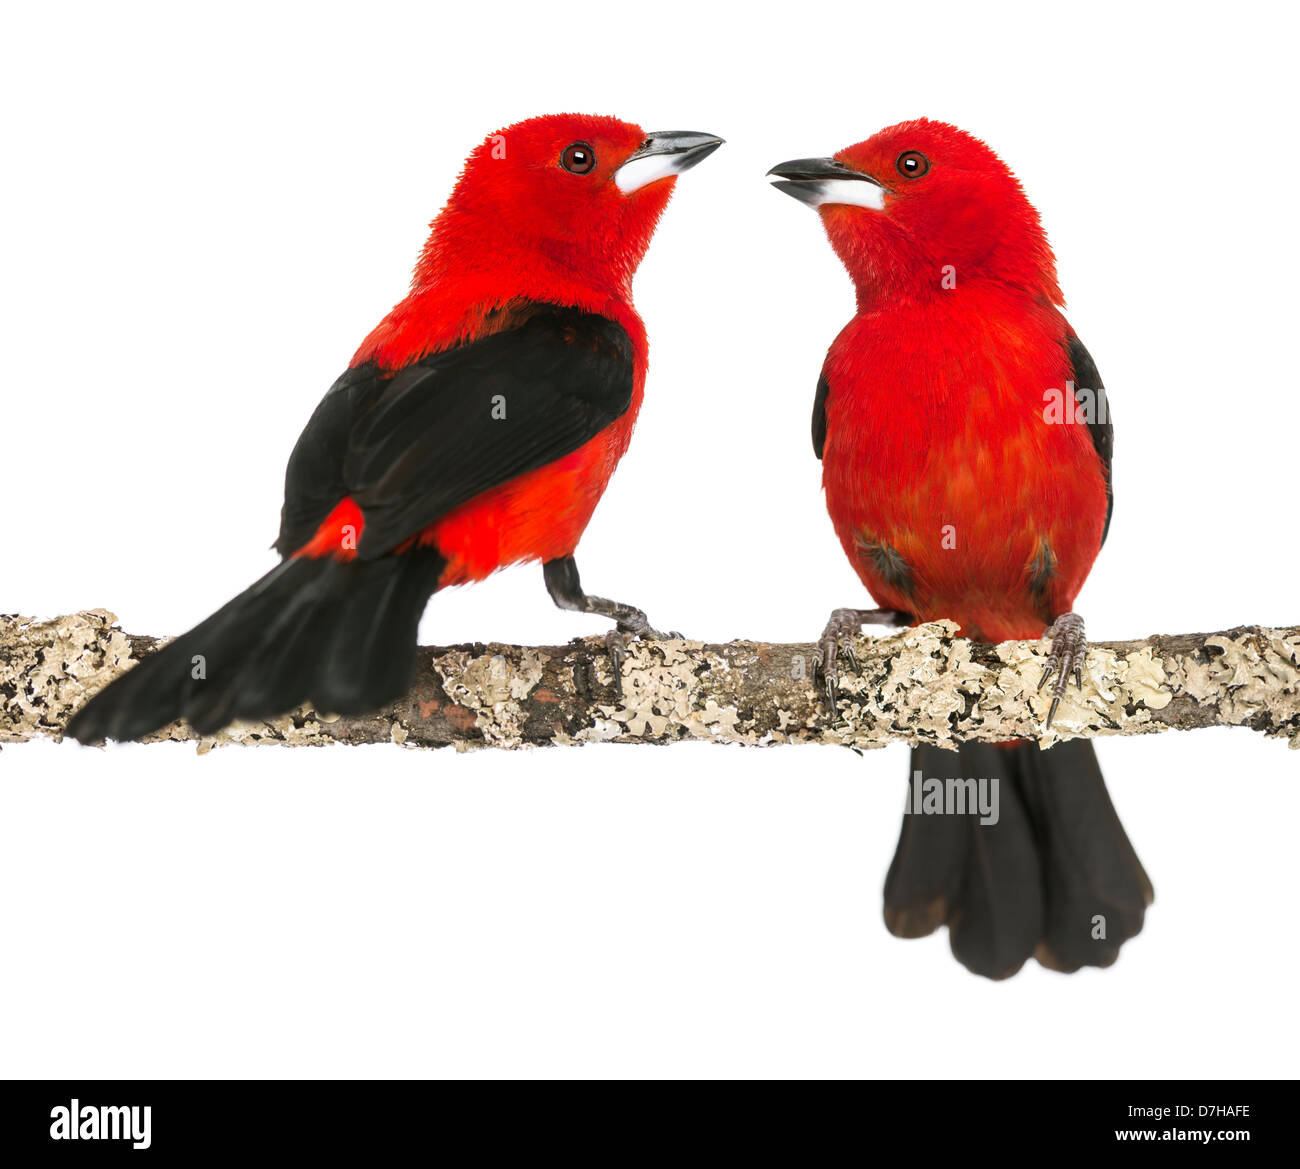 Two Brazilian Tanagers, Ramphocelus bresilius, perched on a branch in front of a white background Stock Photo